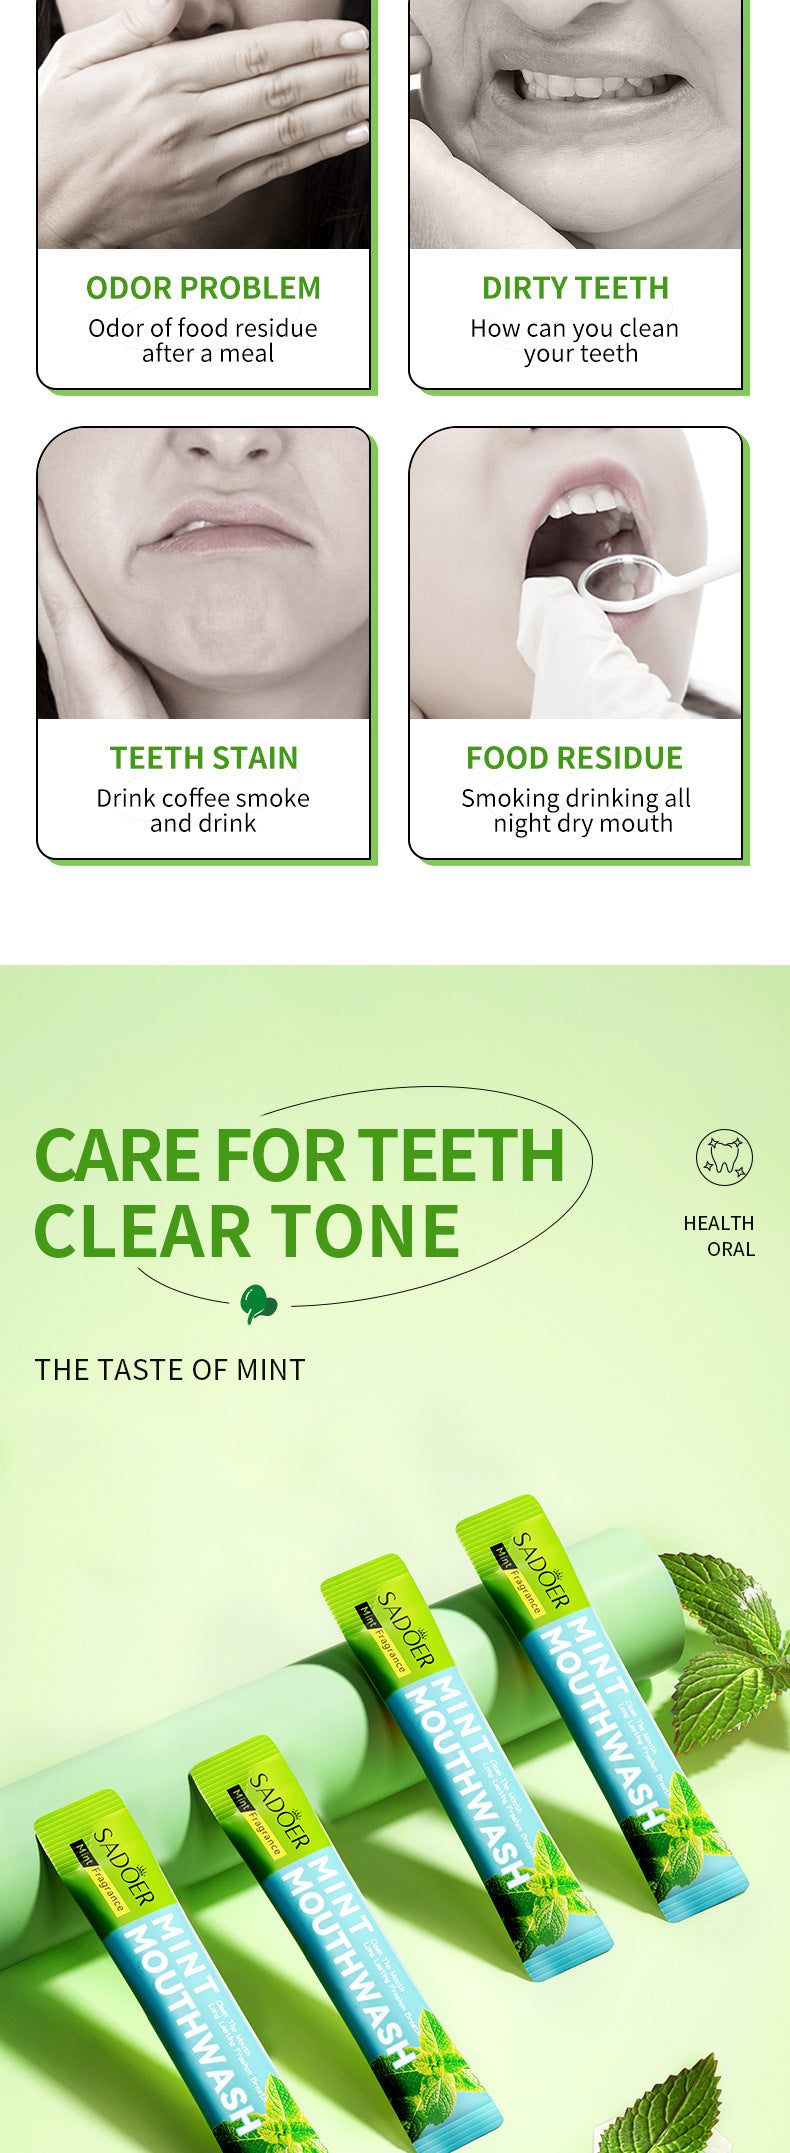 Mint Mouthwash Refreshing Oral Cleansing Care